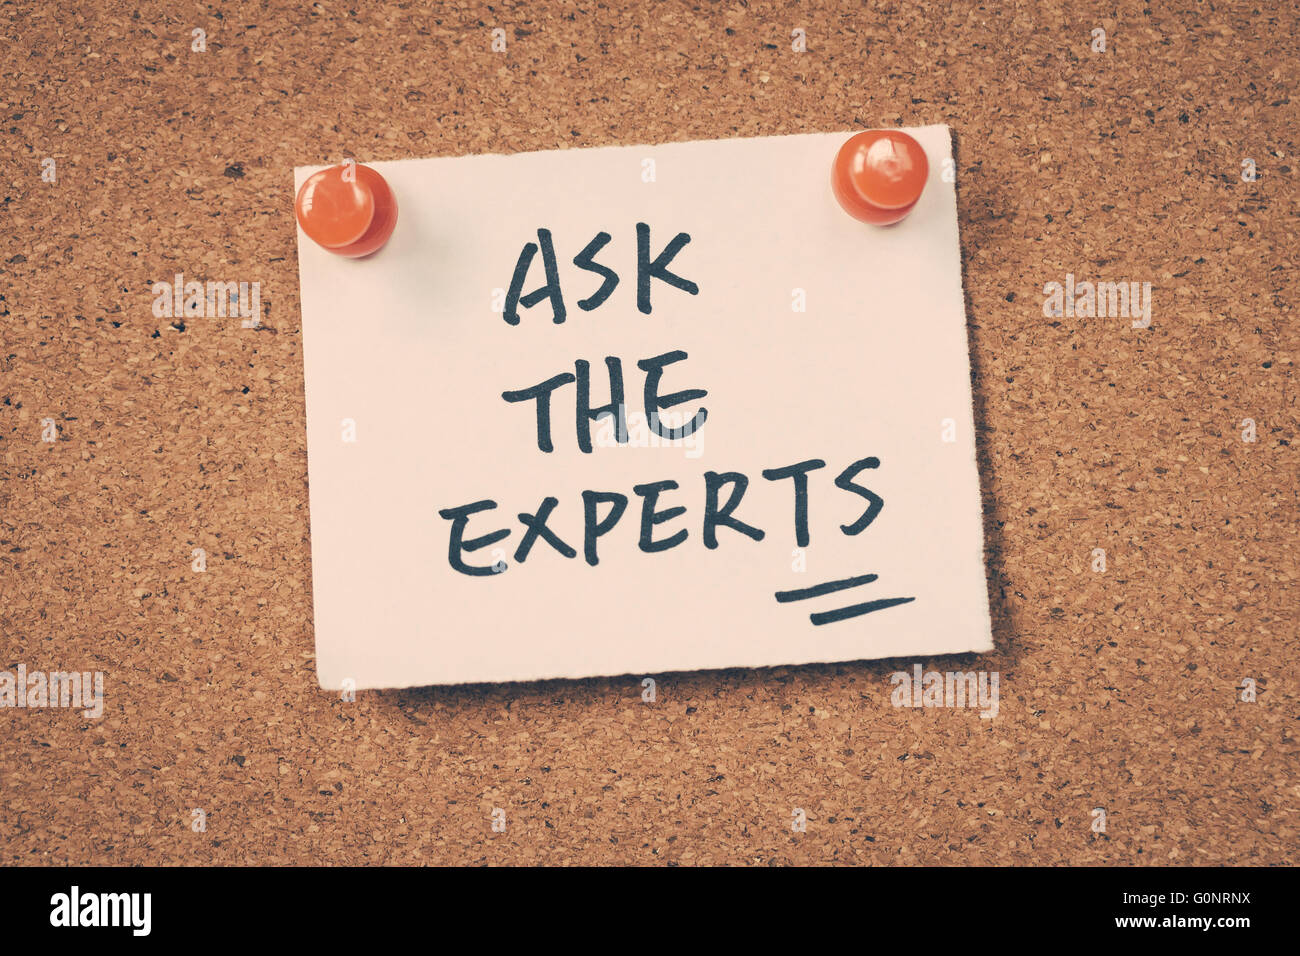 Ask the experts Stock Photo